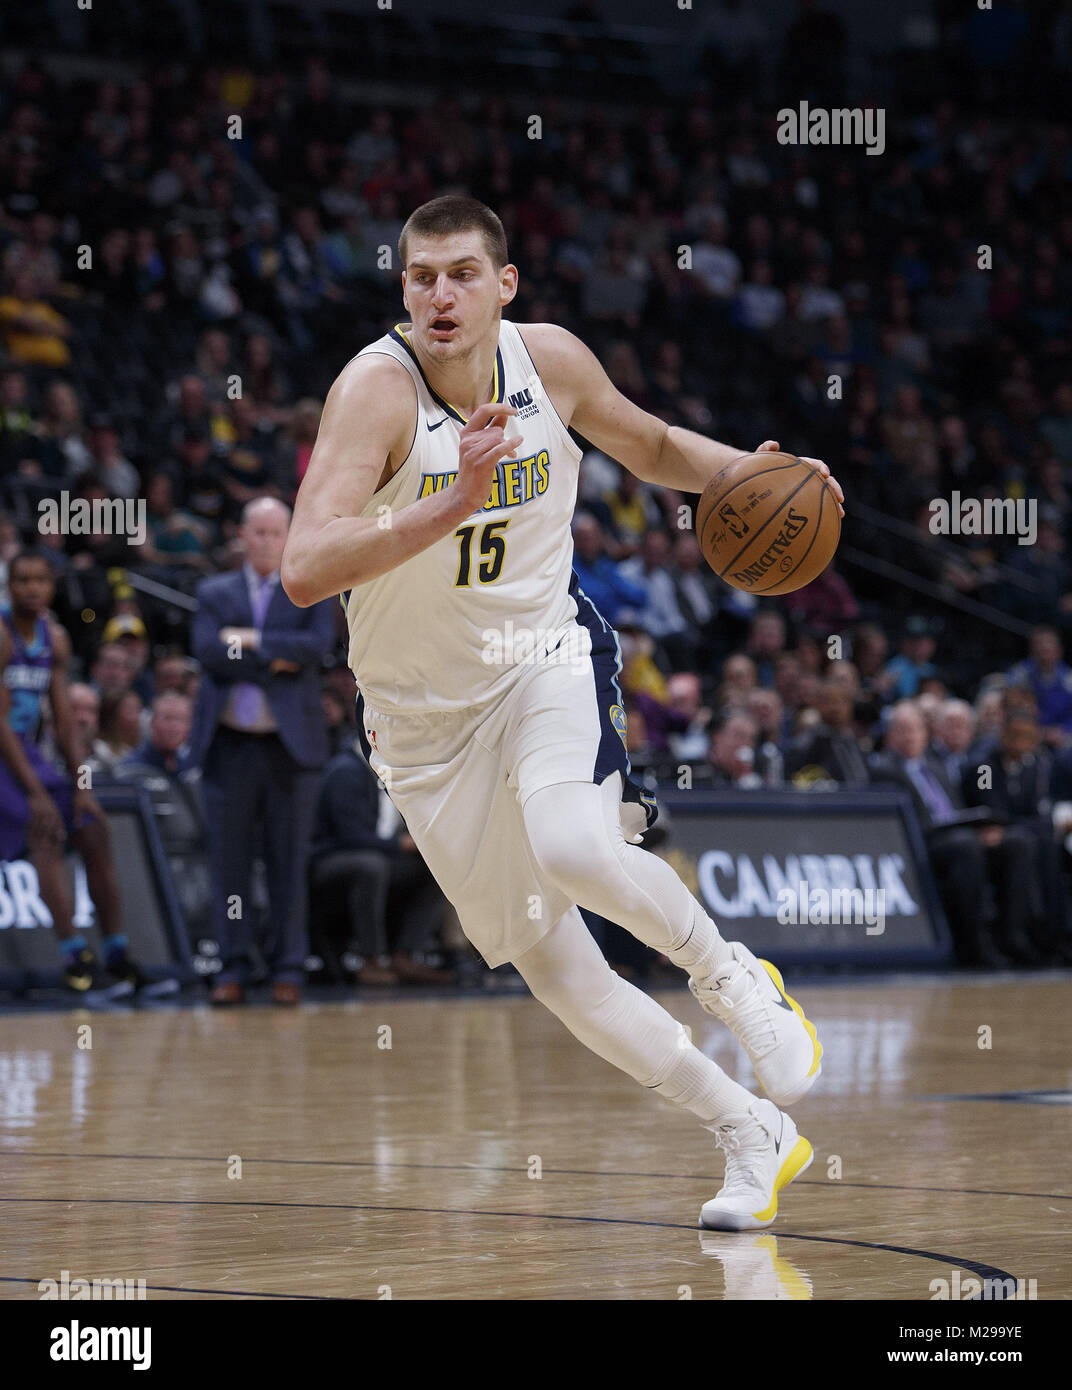 Denver, Colorado, USA. 5th Feb, 2018. Nuggets NIKOLA JOKIC drives to the basket on a break away during the 1st. Half at the Pepsi Center Monday night. The Nuggets beat the Hornets 121-104. Credit: Hector Acevedo/ZUMA Wire/Alamy Live News Stock Photo